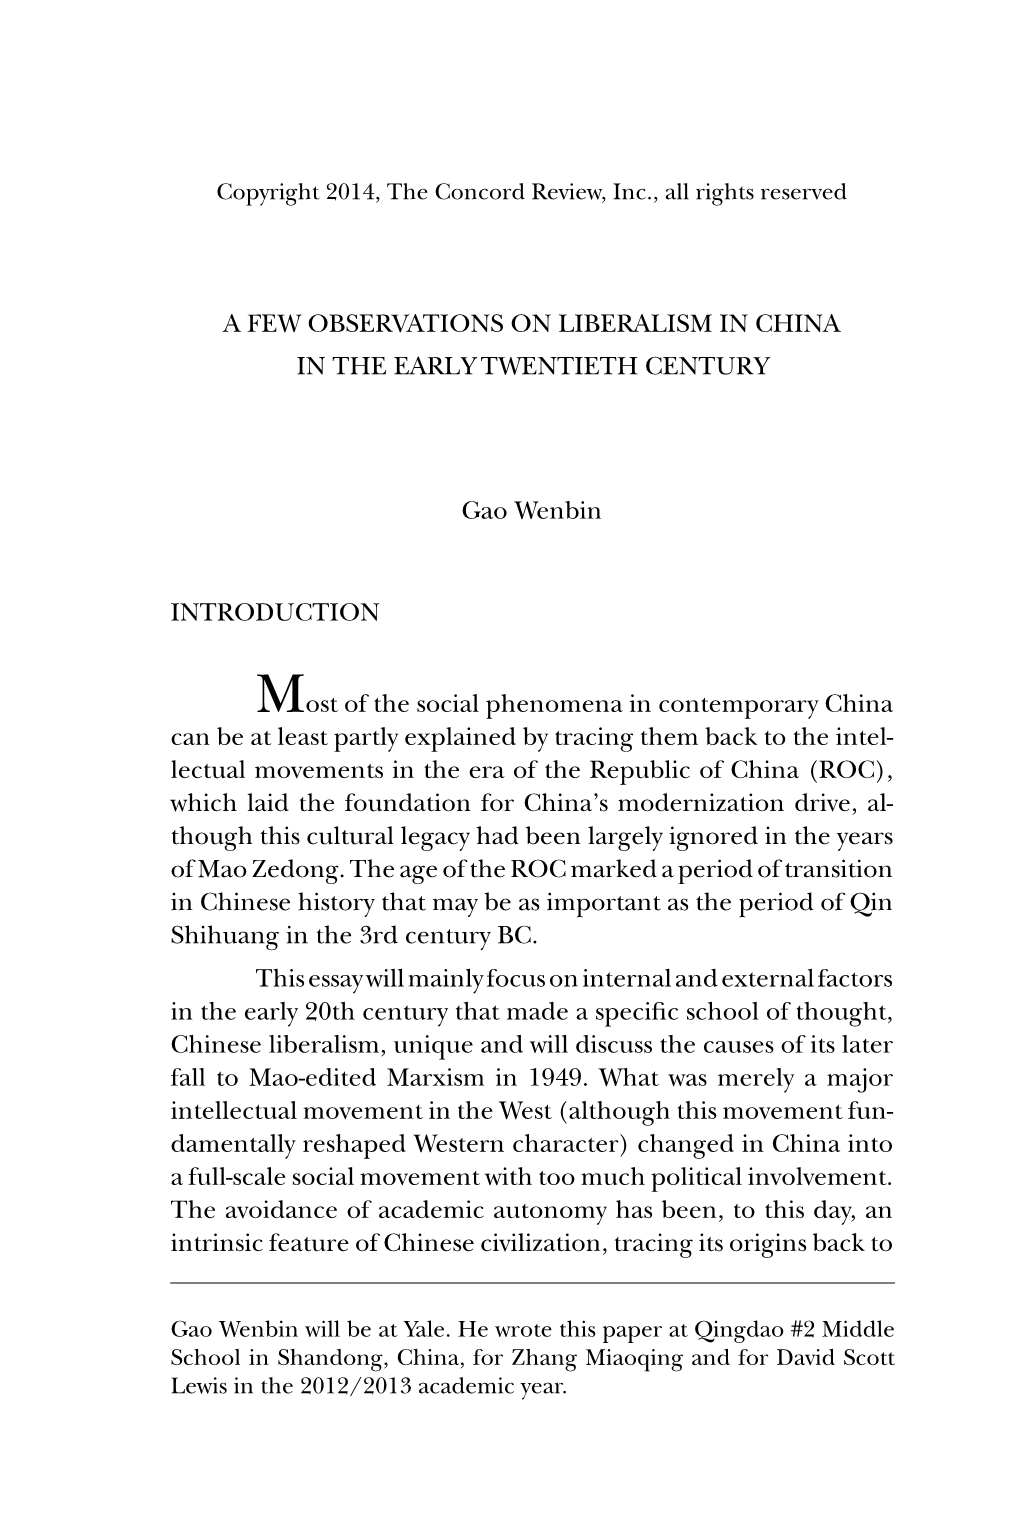 A Few Observations on Liberalism in China in the Early Twentieth Century